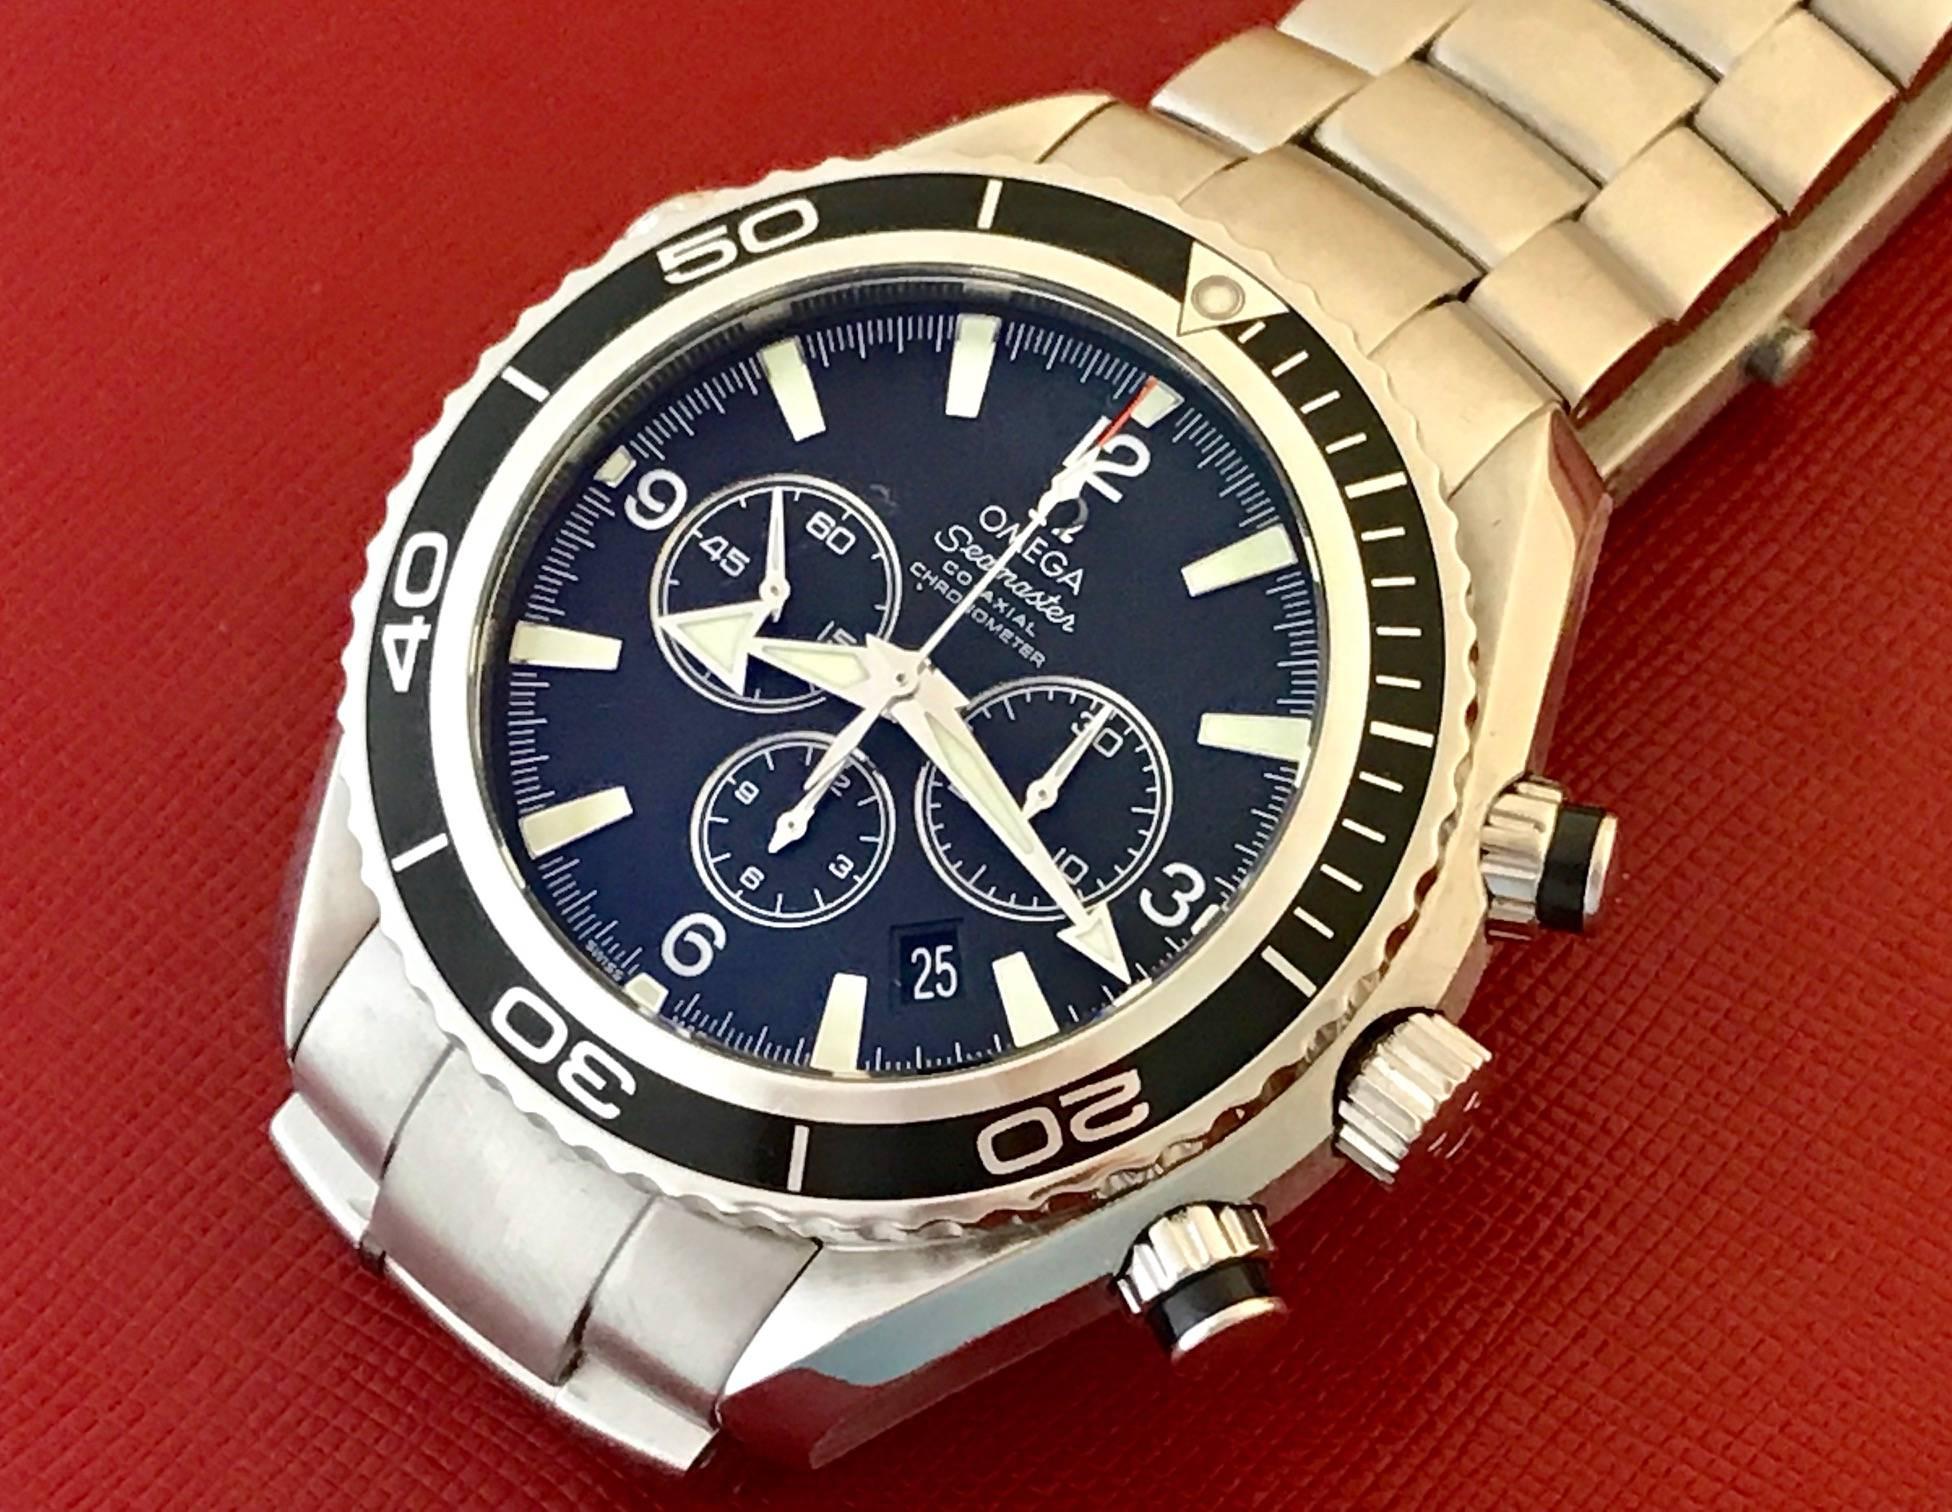 Omega Mens Seamaster Planet Ocean Chronograph. Automatic Winding Co-Axial Movement, Helium Release Valve. Stainless Steel round style case with black rotating bezel (42mm dia.). Stainless Steel Omega Seamaster bracelet.  Black Dial with luminous